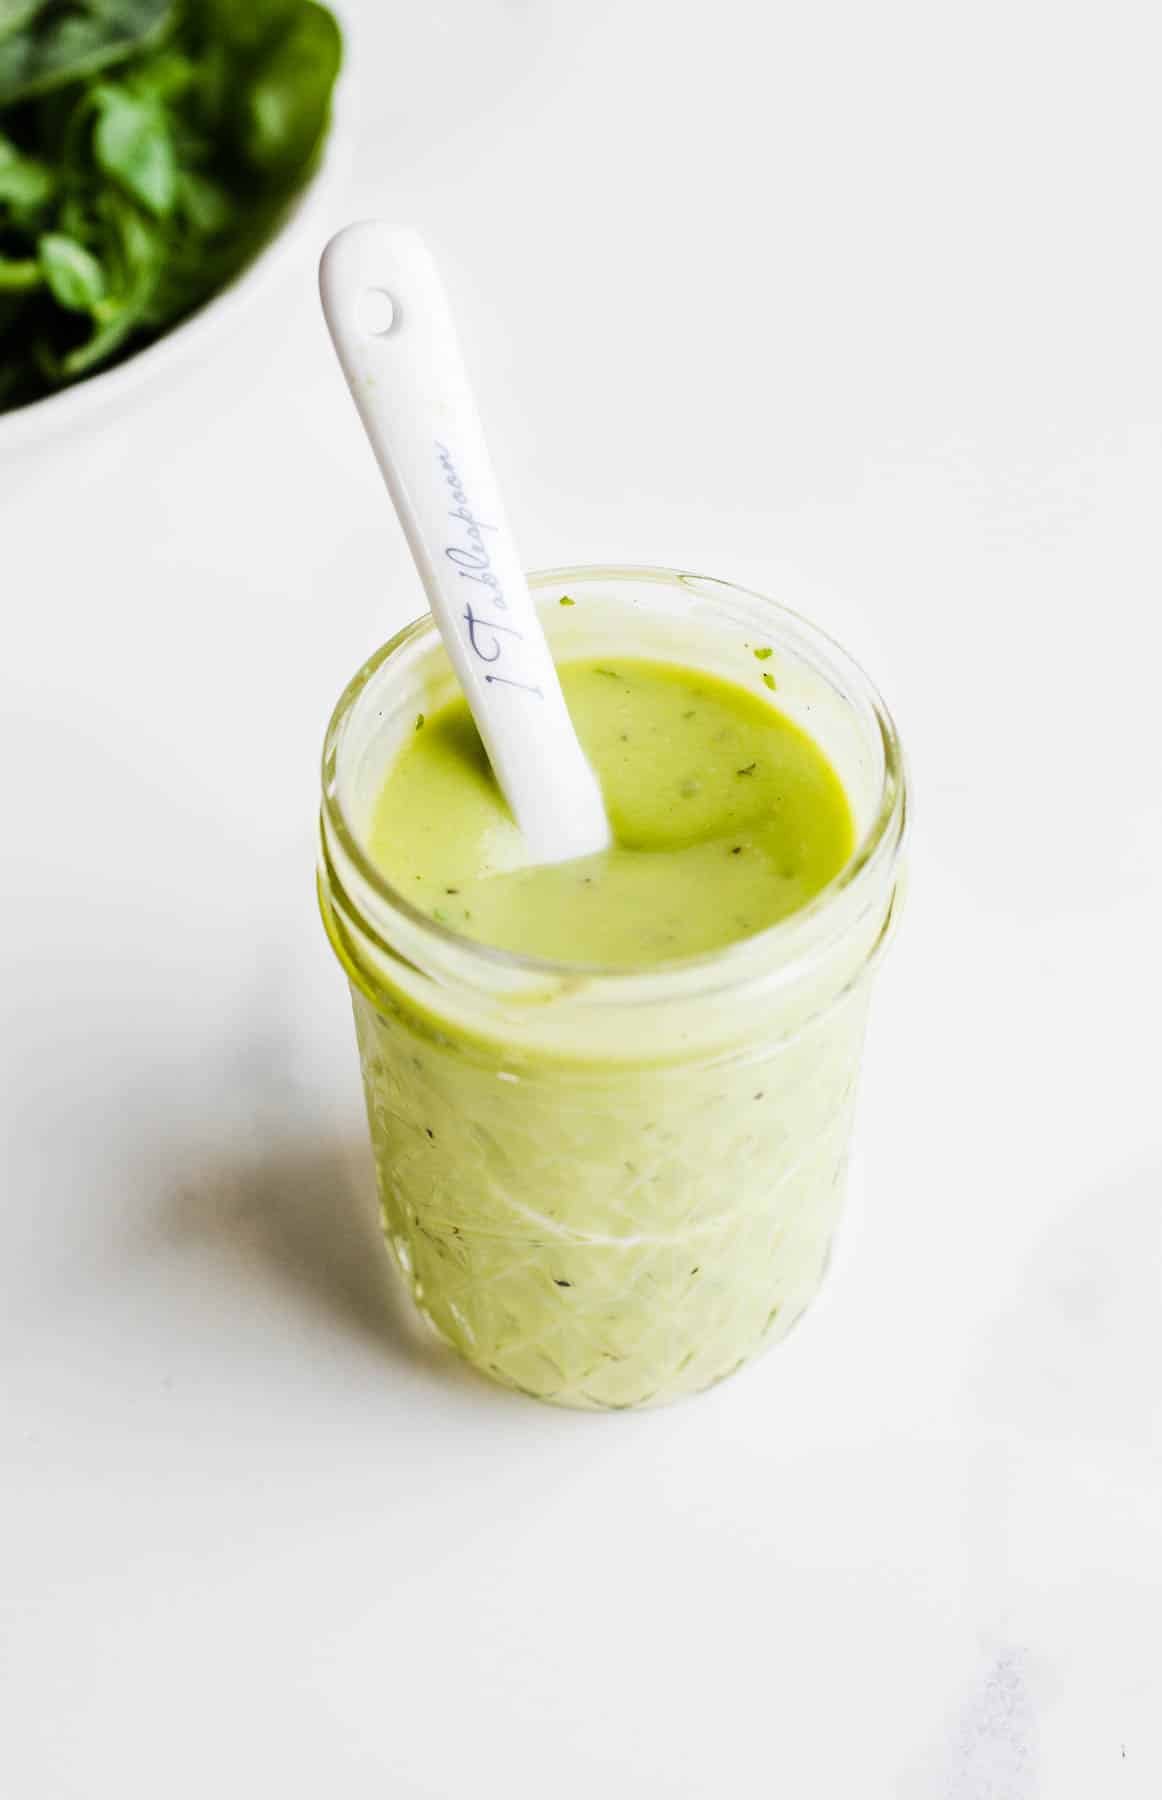 Green avocado dressing in a glass jar with a white ceramic spoon dipped in the middle.